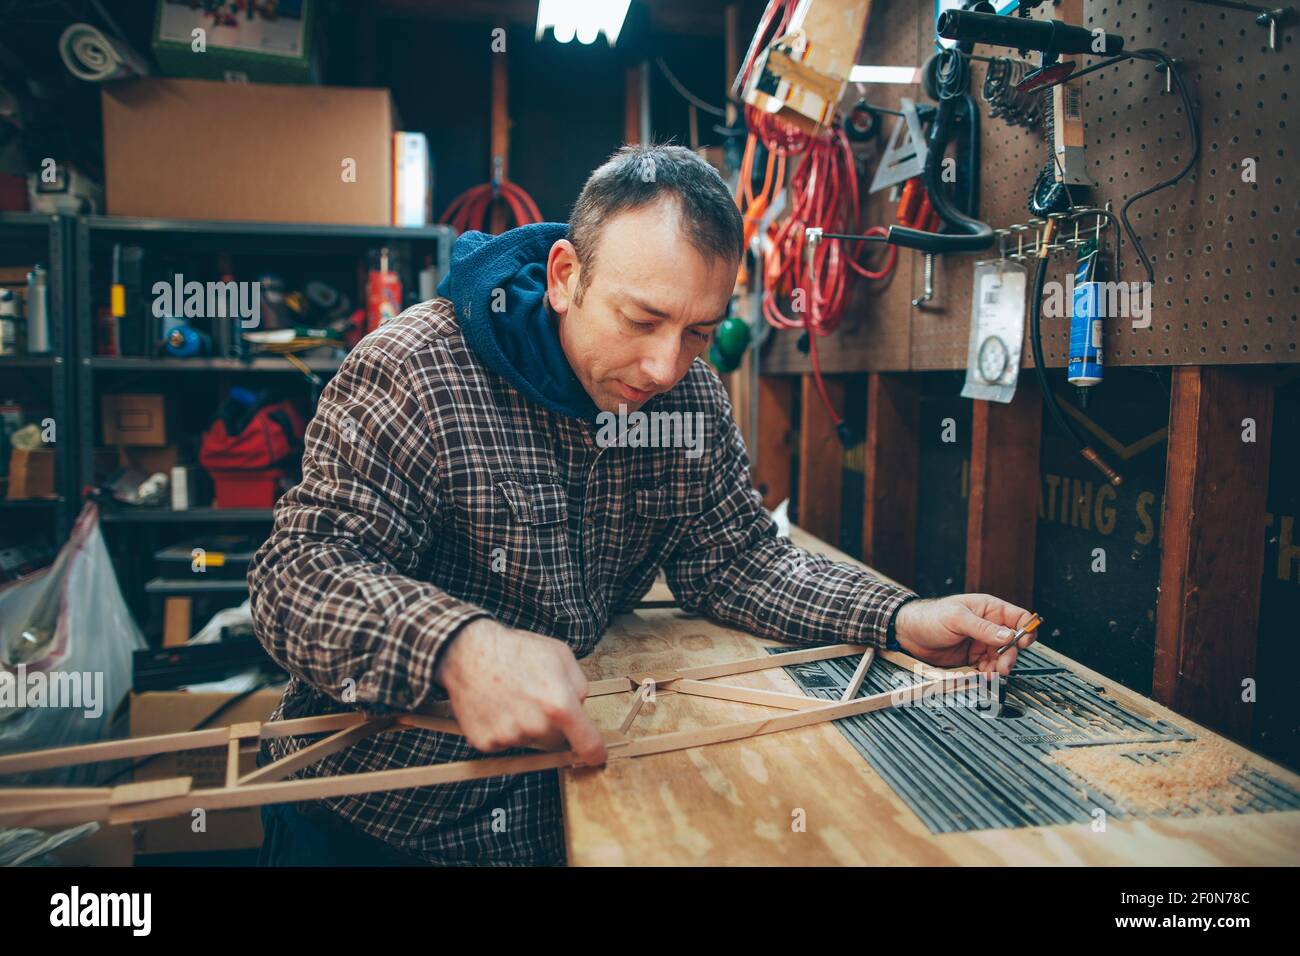 A Caucasian, middle aged man works on a small piece of a wooden airplane in his garage. Stock Photo